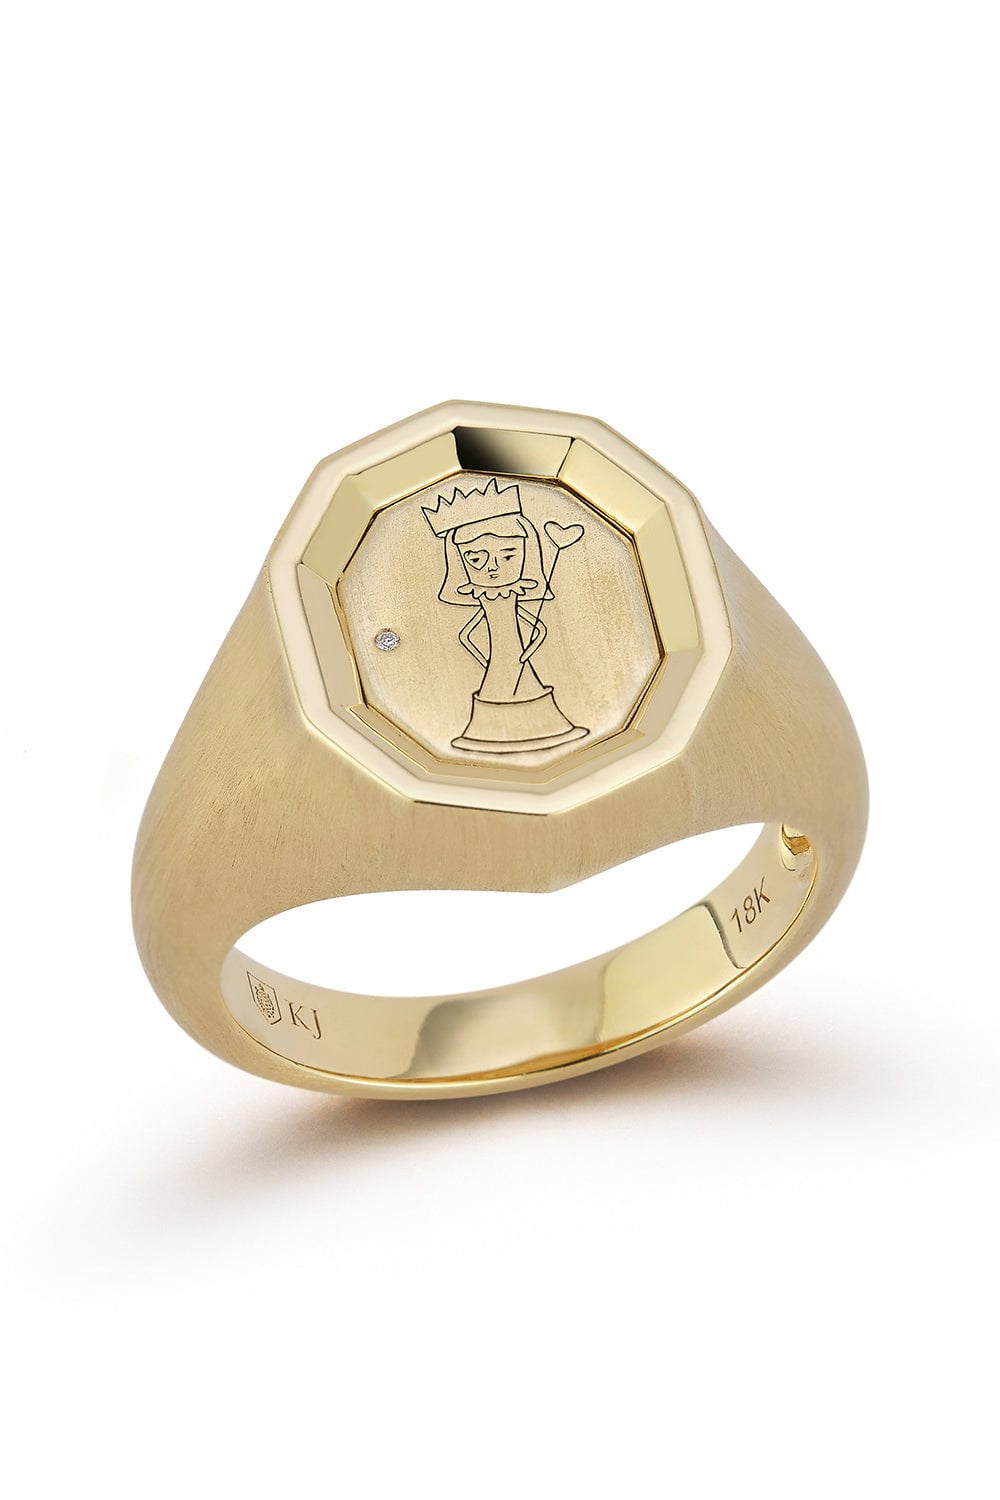 KATHERINE JETTER-The Queen Of Hearts Ring-YELLOW GOLD